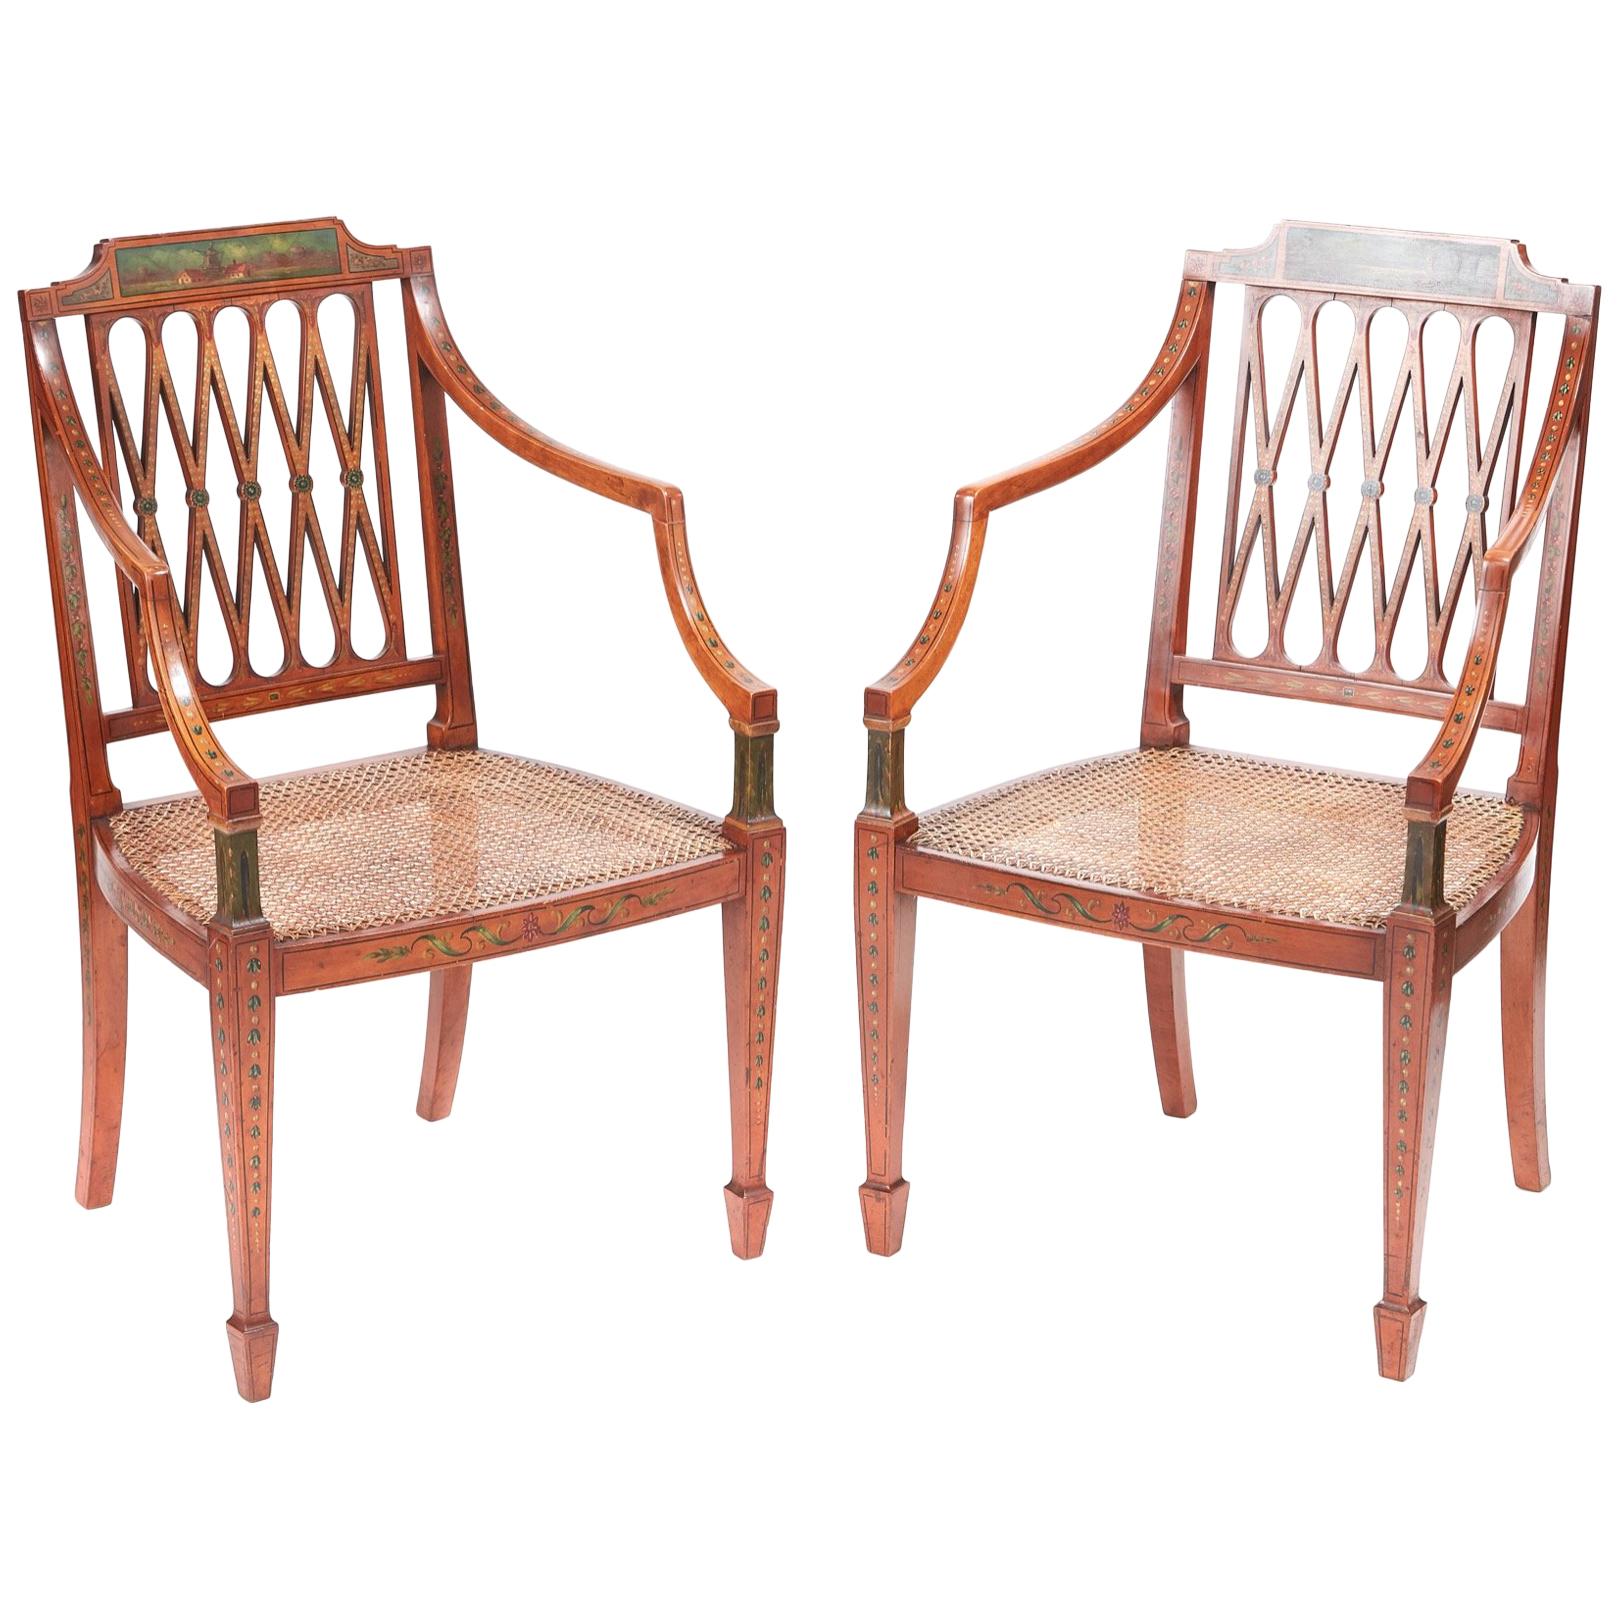 Fine Quality Pair of Original Painted Satinwood Armchairs